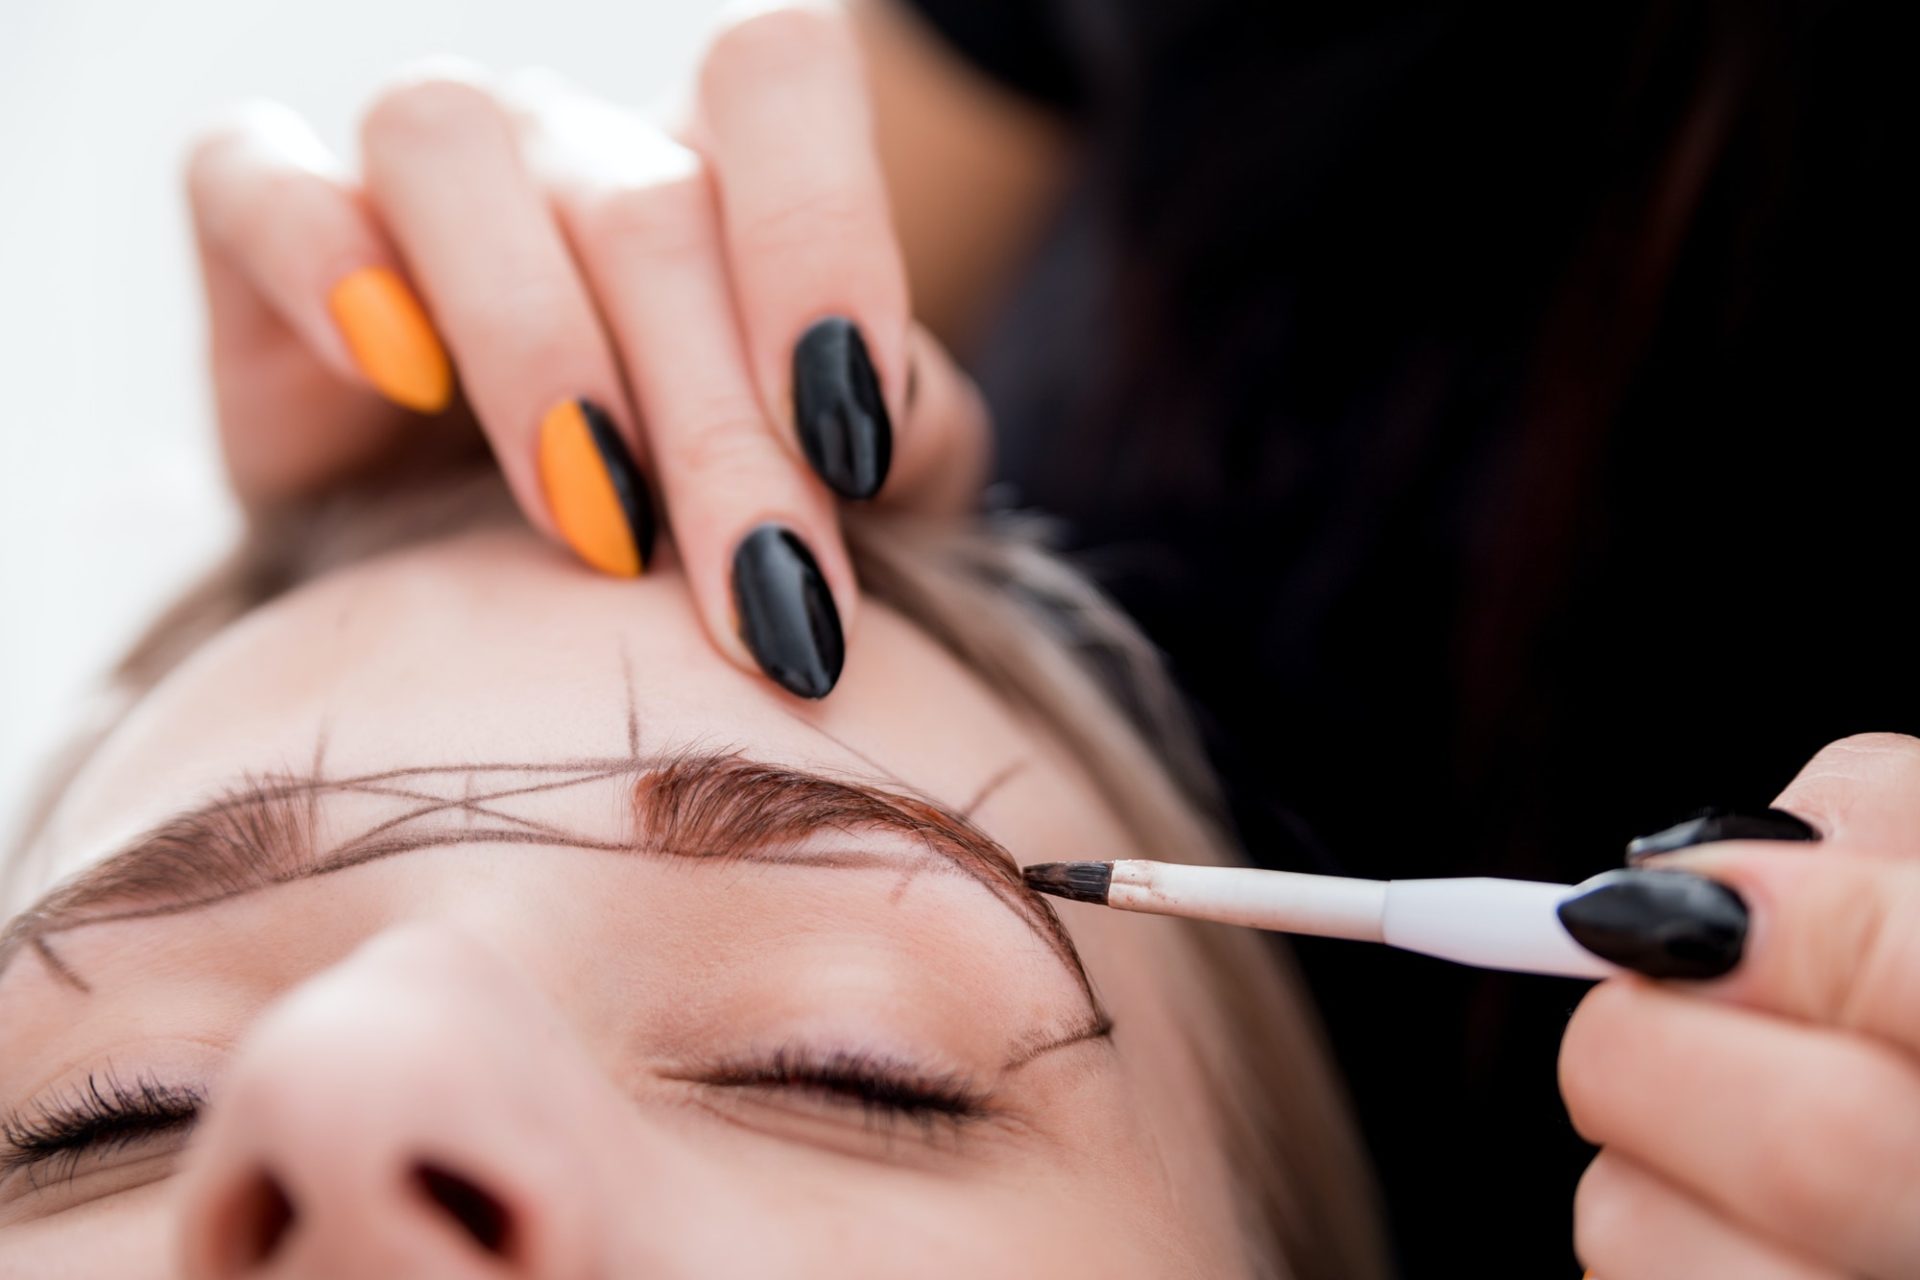 Permanent make up on eyebrows at beauty salon